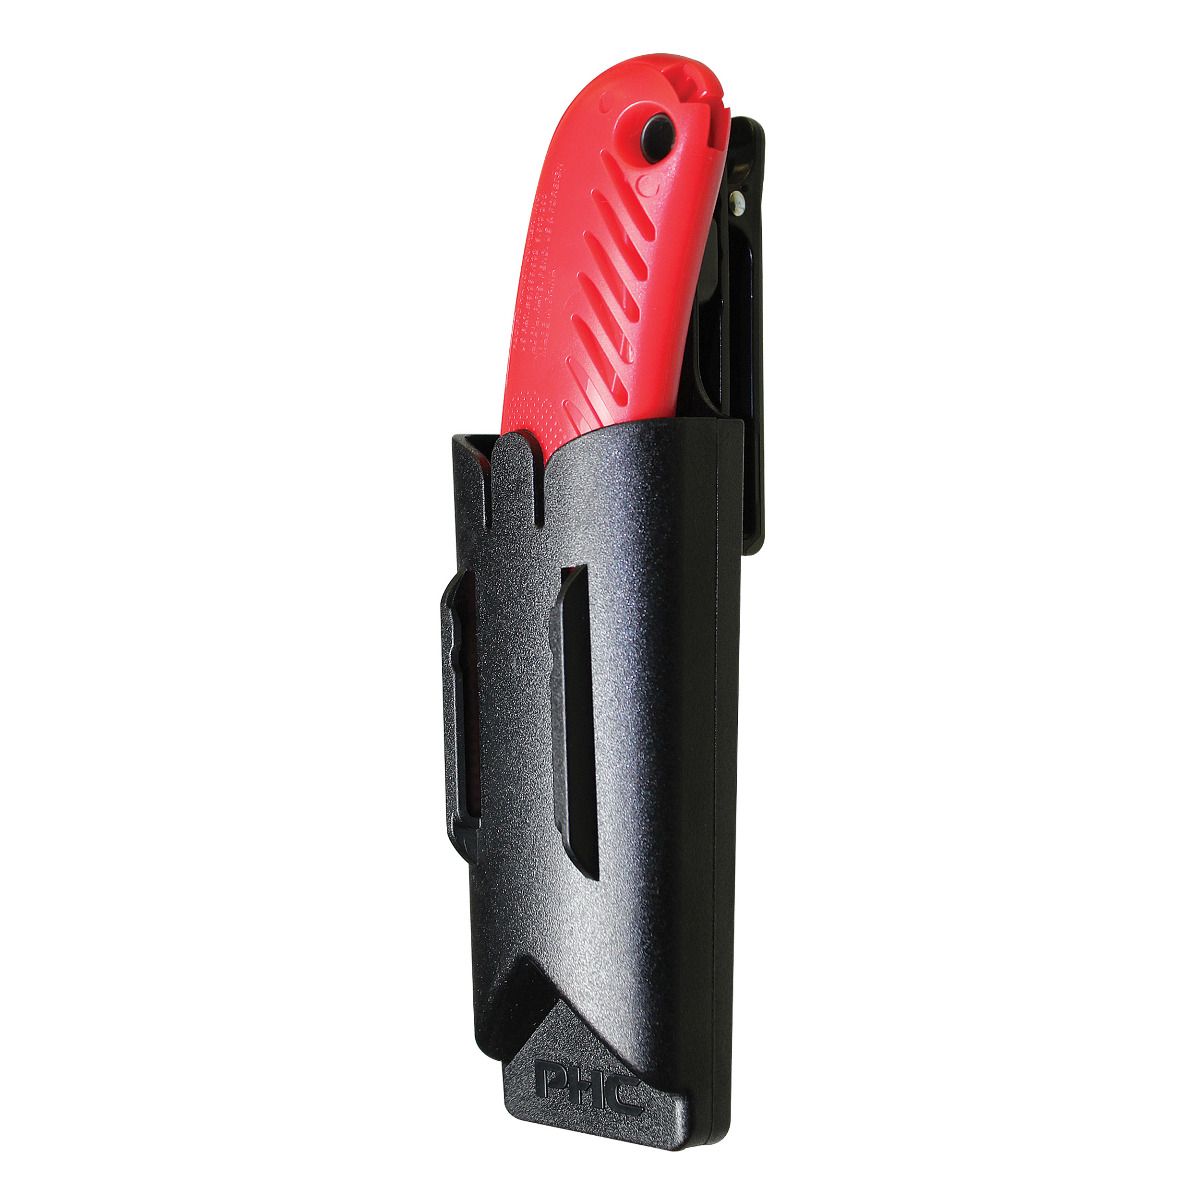 Pacific Handy Cutter S4L Safety Cutter